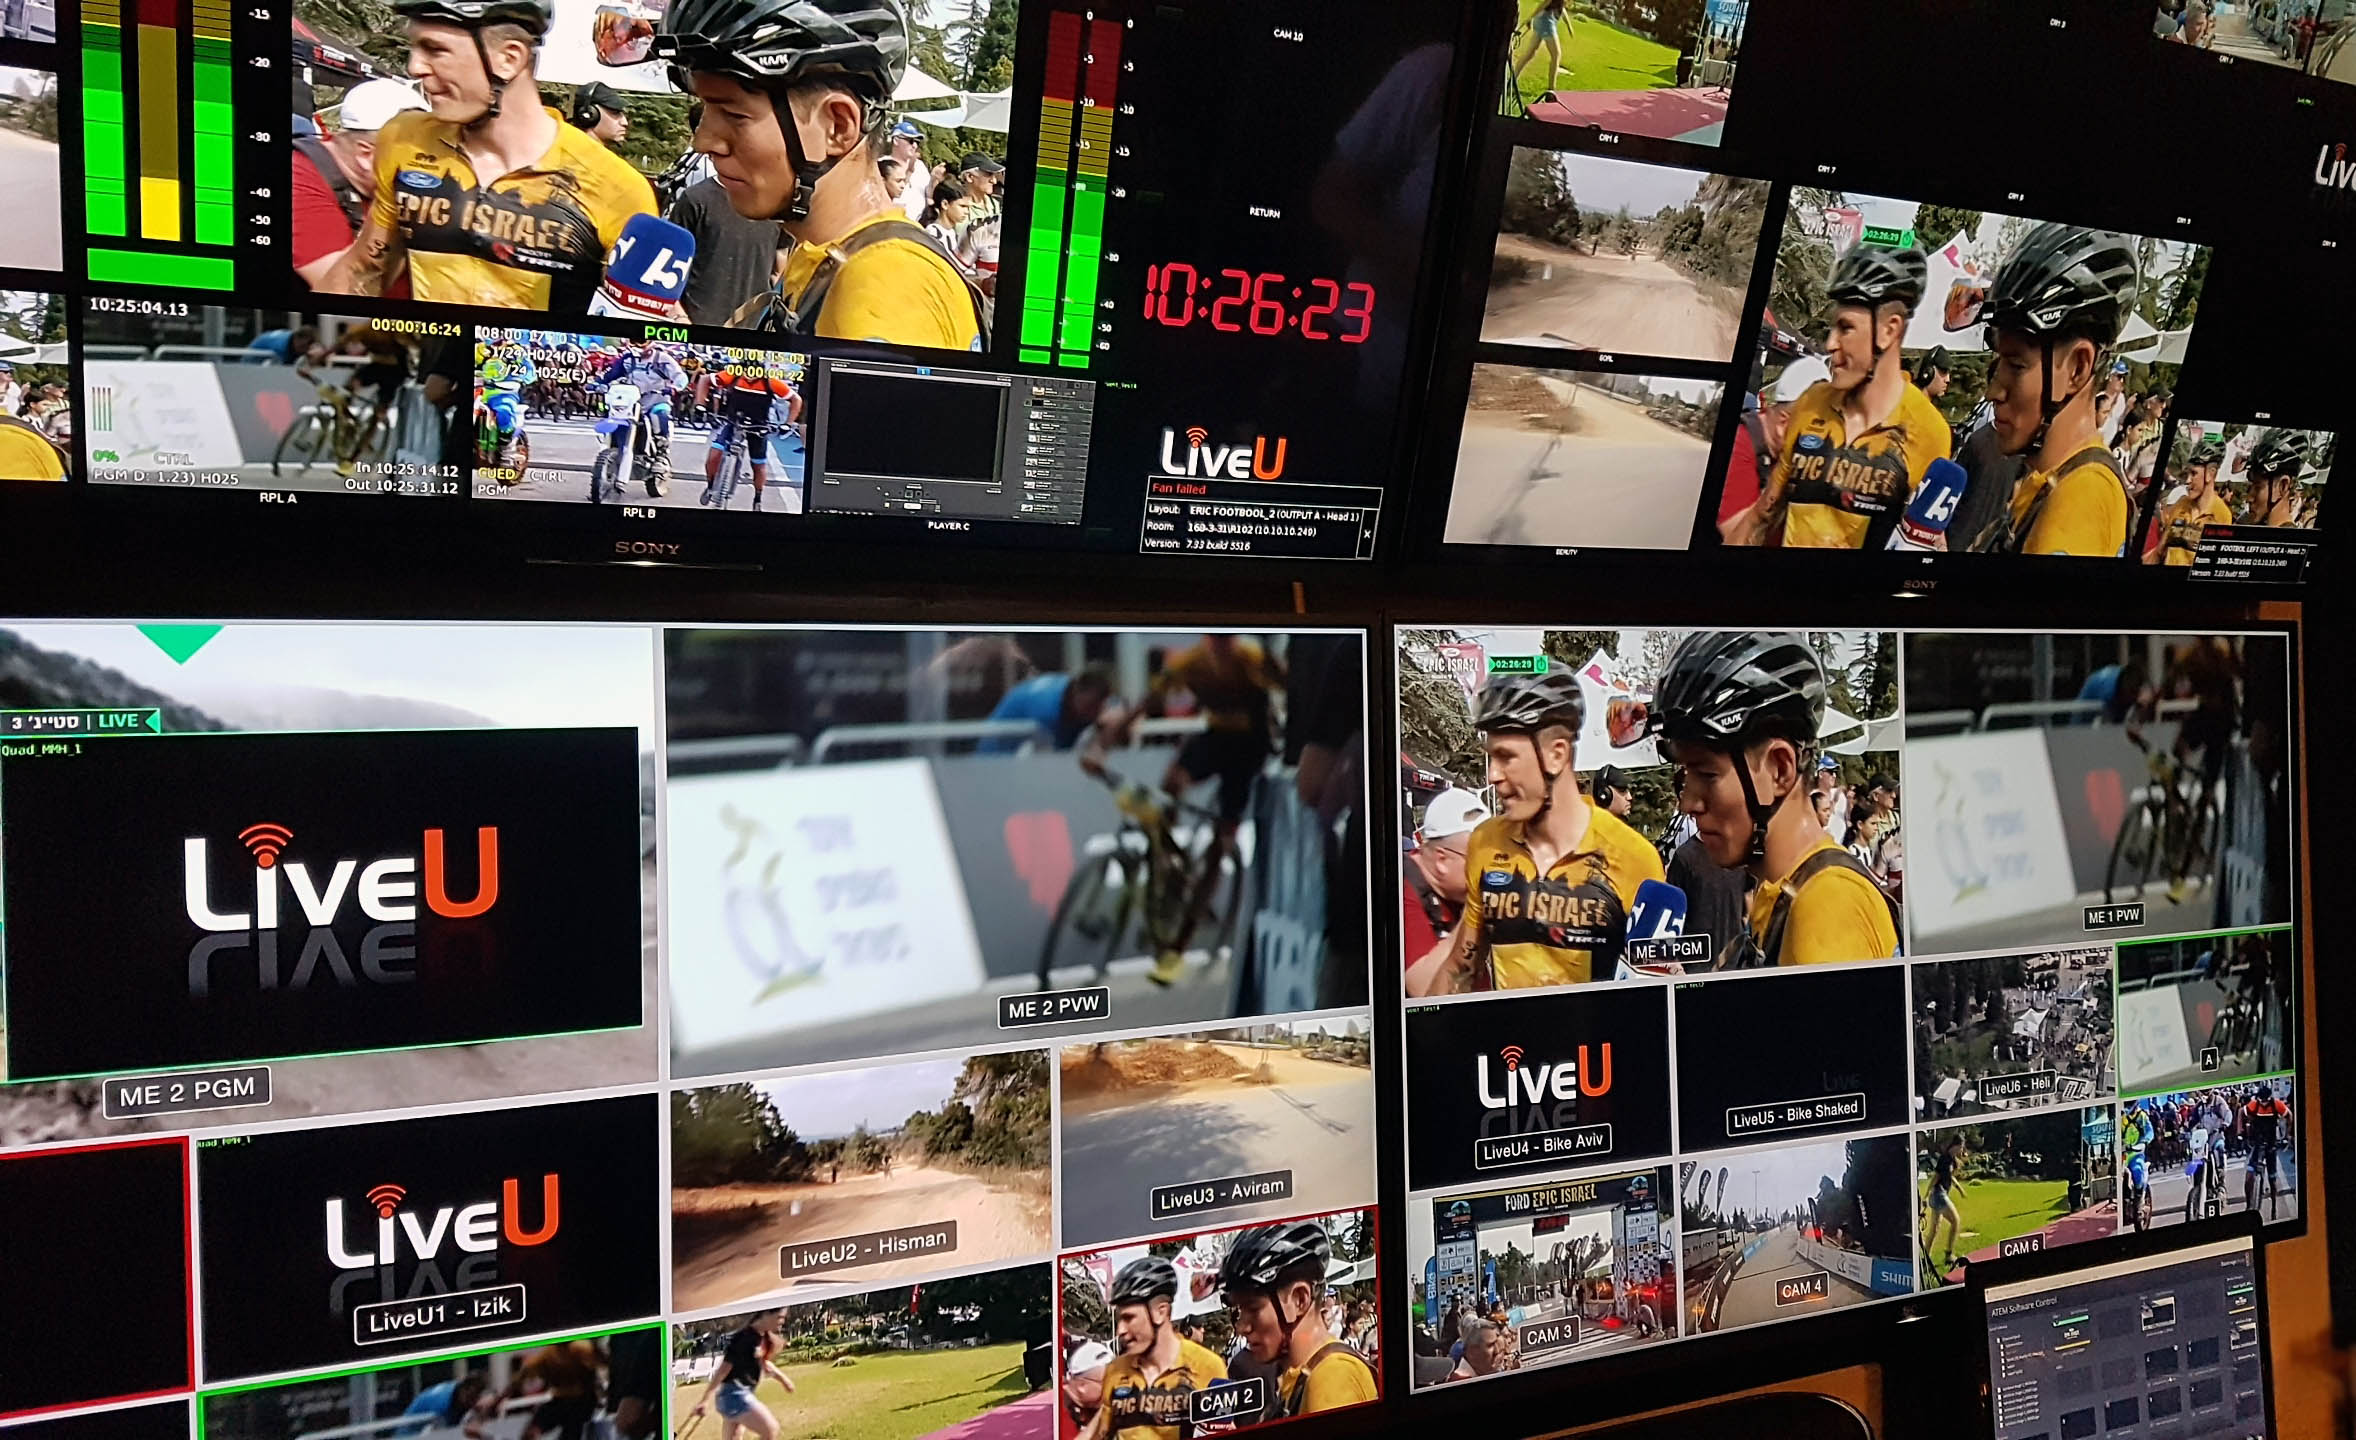 IBC 2021 LiveU To Present New Solution, Showcase Services in Live Video and Content Sharing